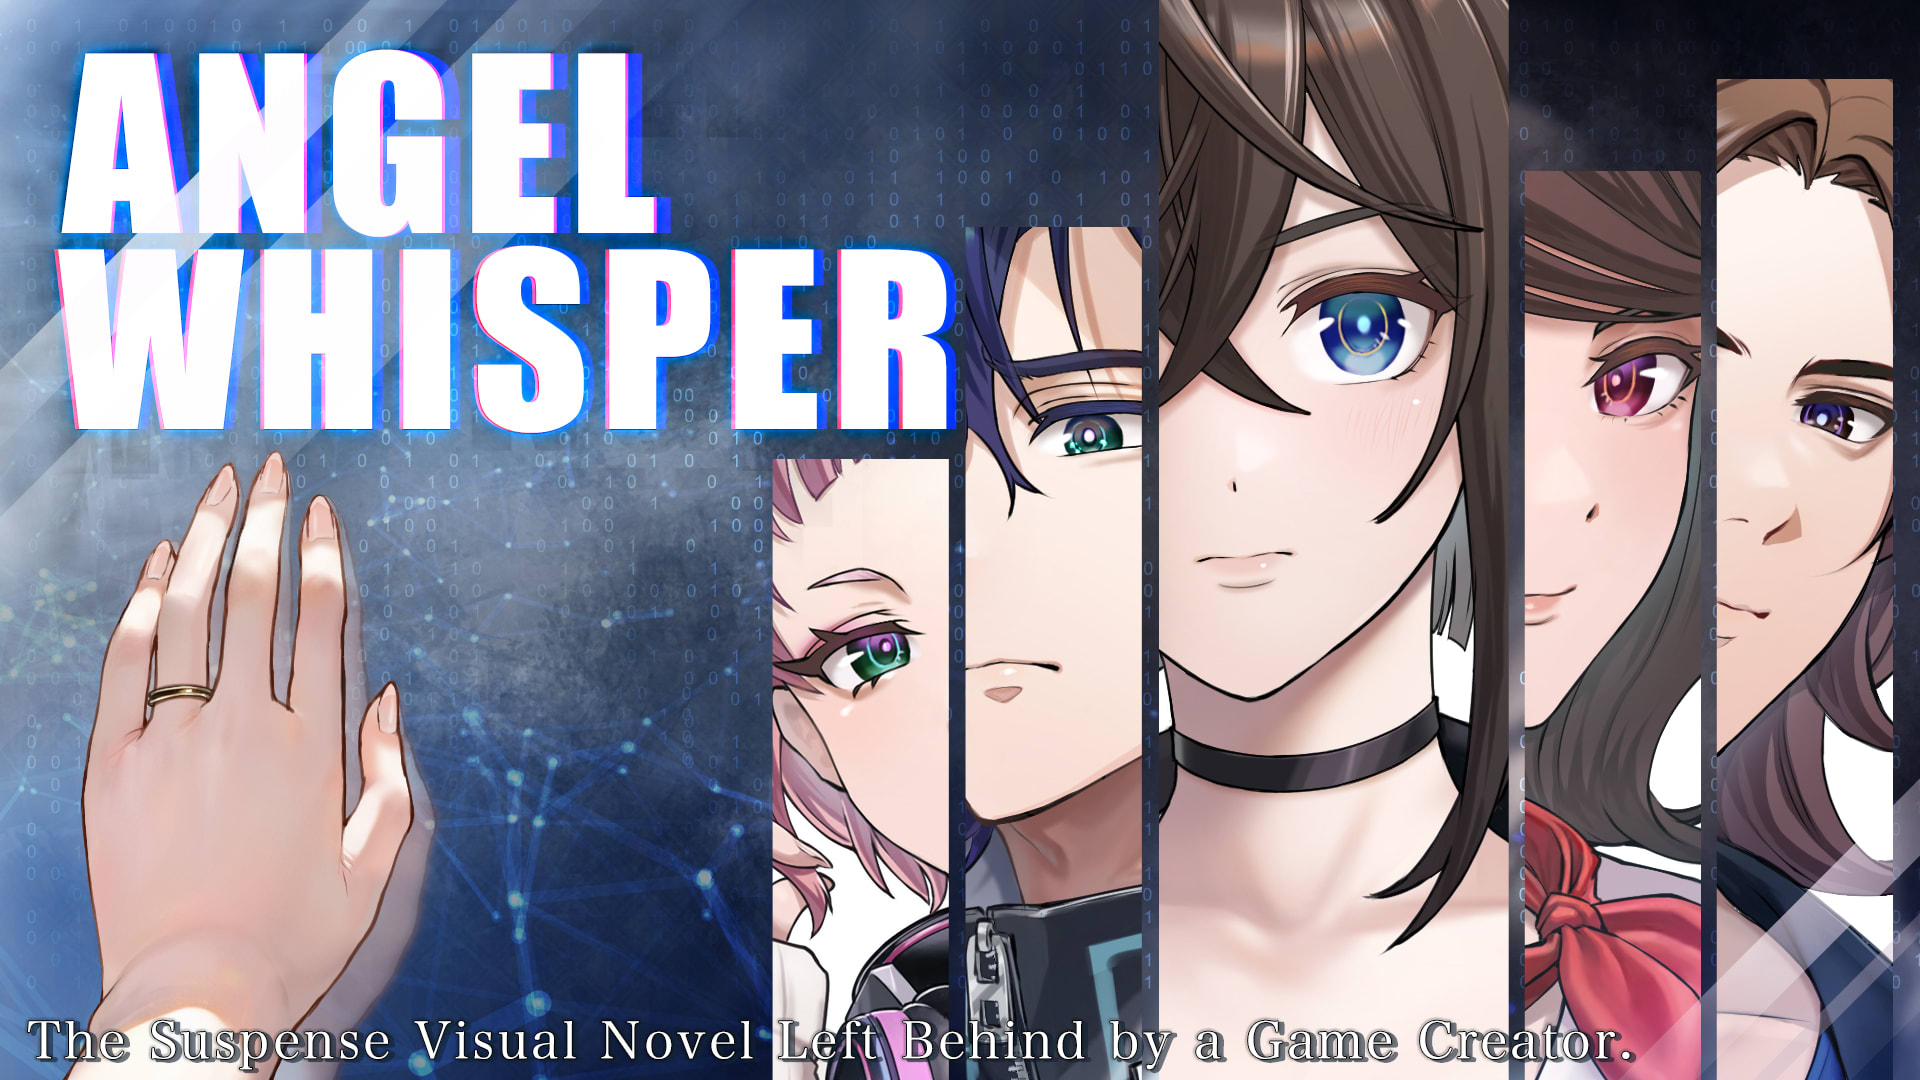 ANGEL WHISPER - The Suspense Visual Novel Left Behind by a Game Creator. 1